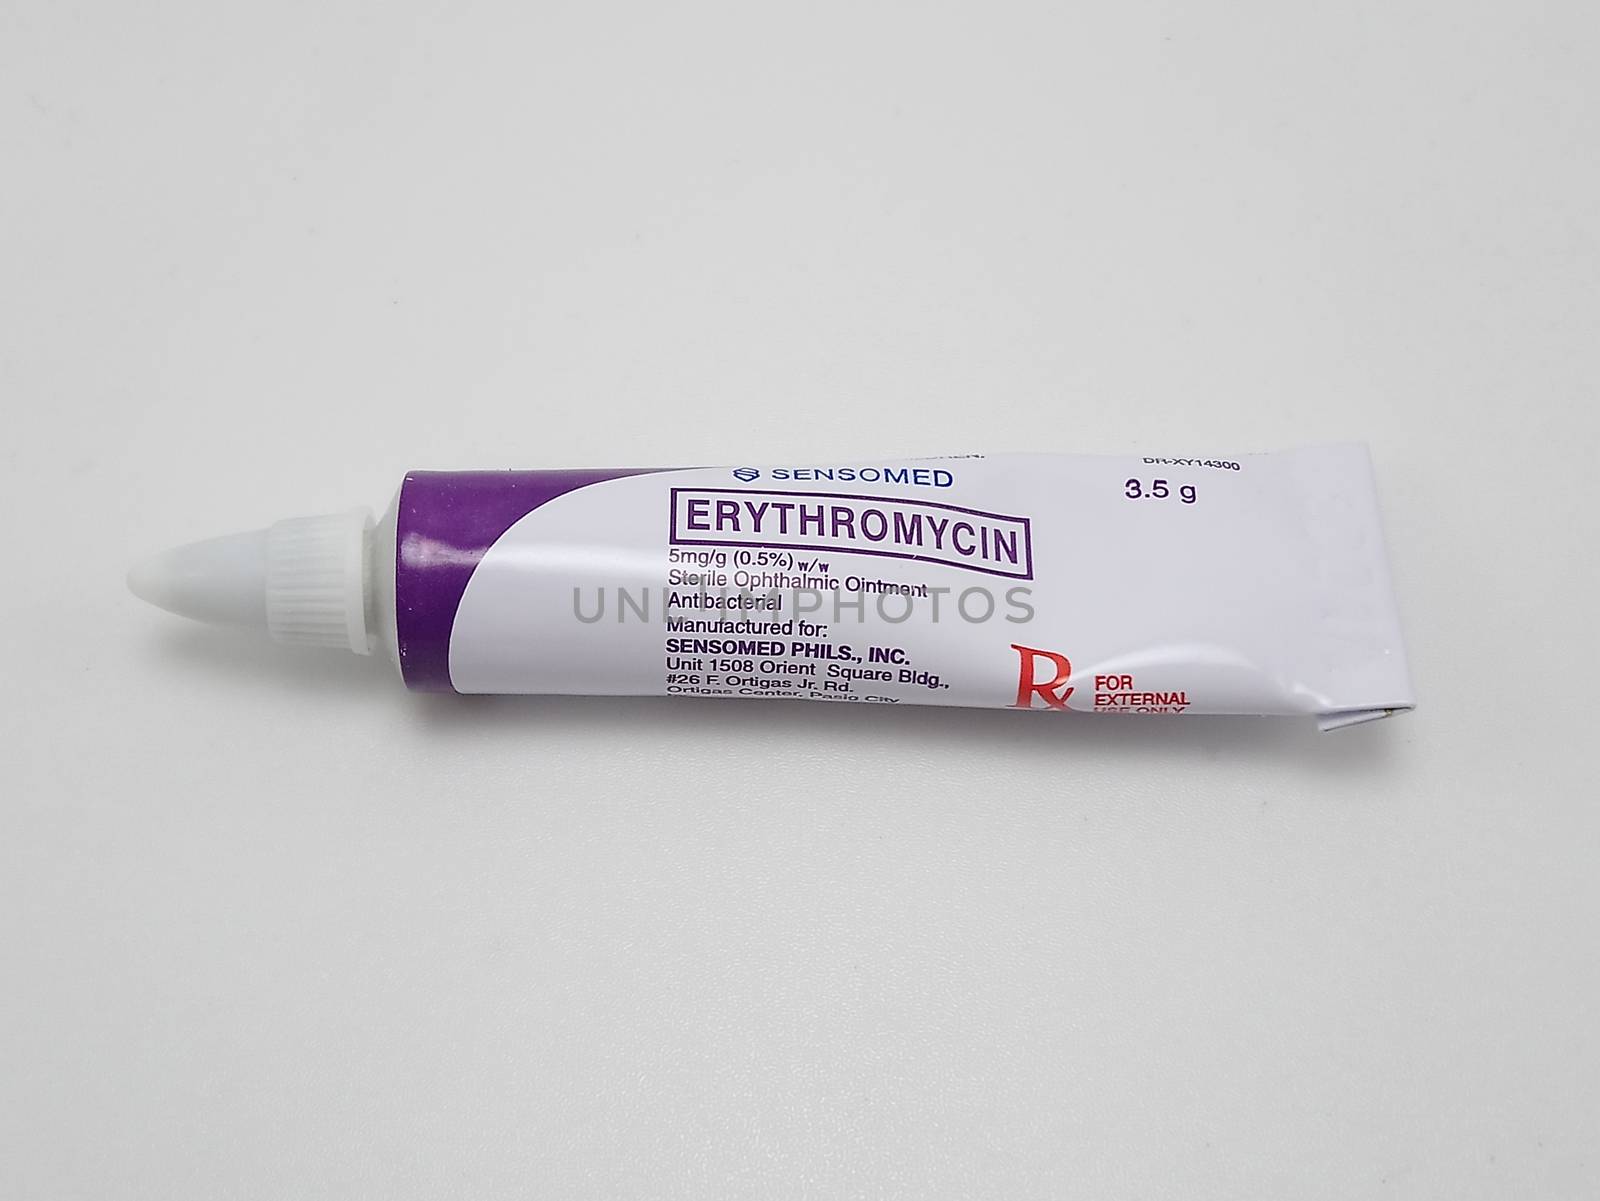 Sensomed erythromycin ointment tube in Manila, Philippines by imwaltersy